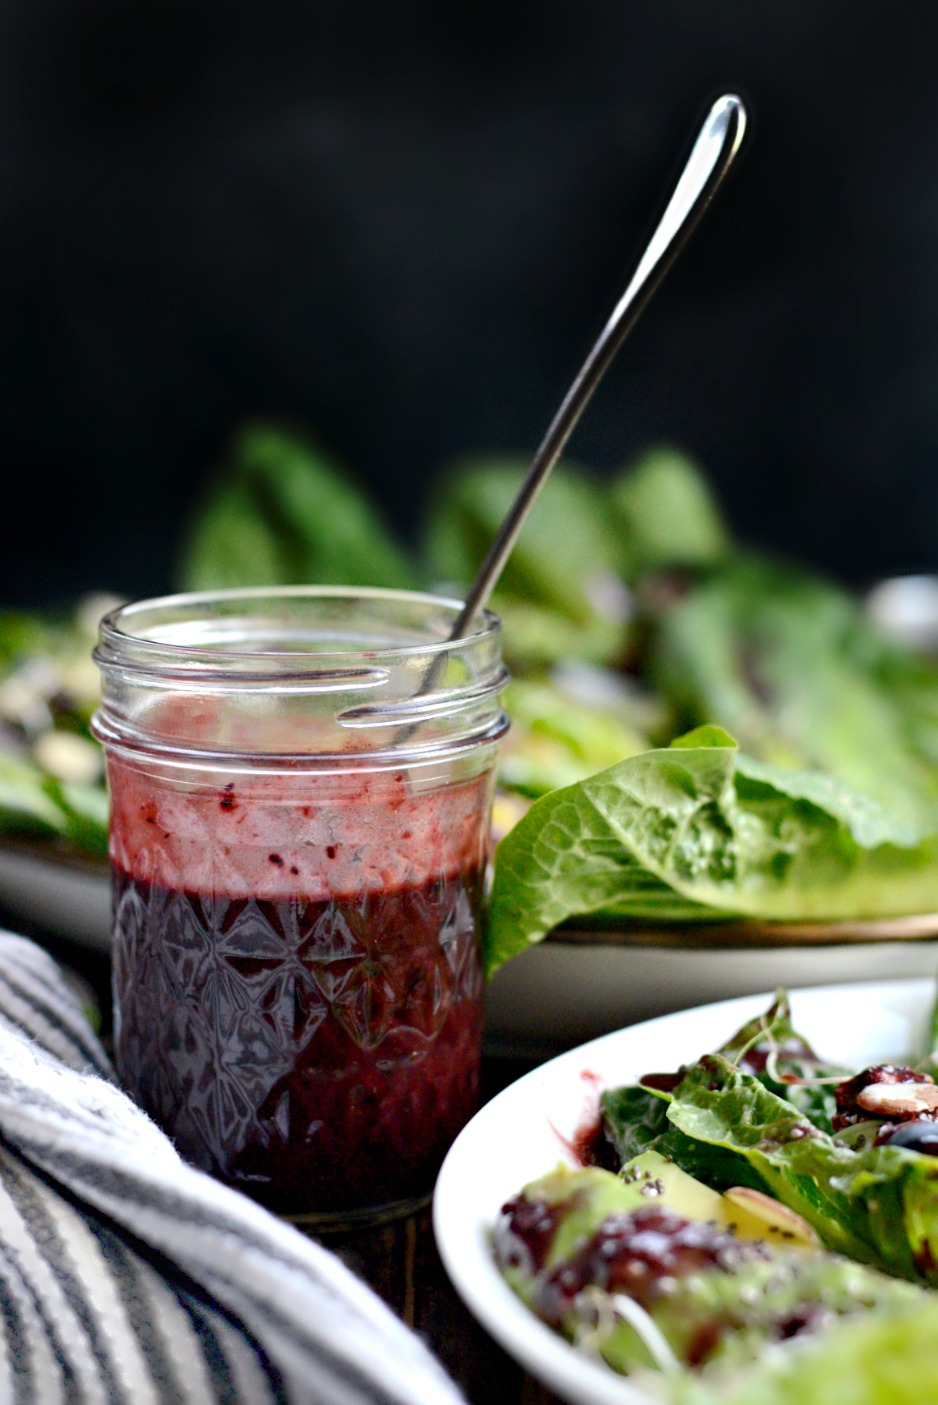 Homemade Salad Dressings and Vinaigrette Recipes - Blueberry Almond Salad with Goat Cheese, Avocado and Blueberry Balsamic Vinaigrette l SimplyScratch.com (12)